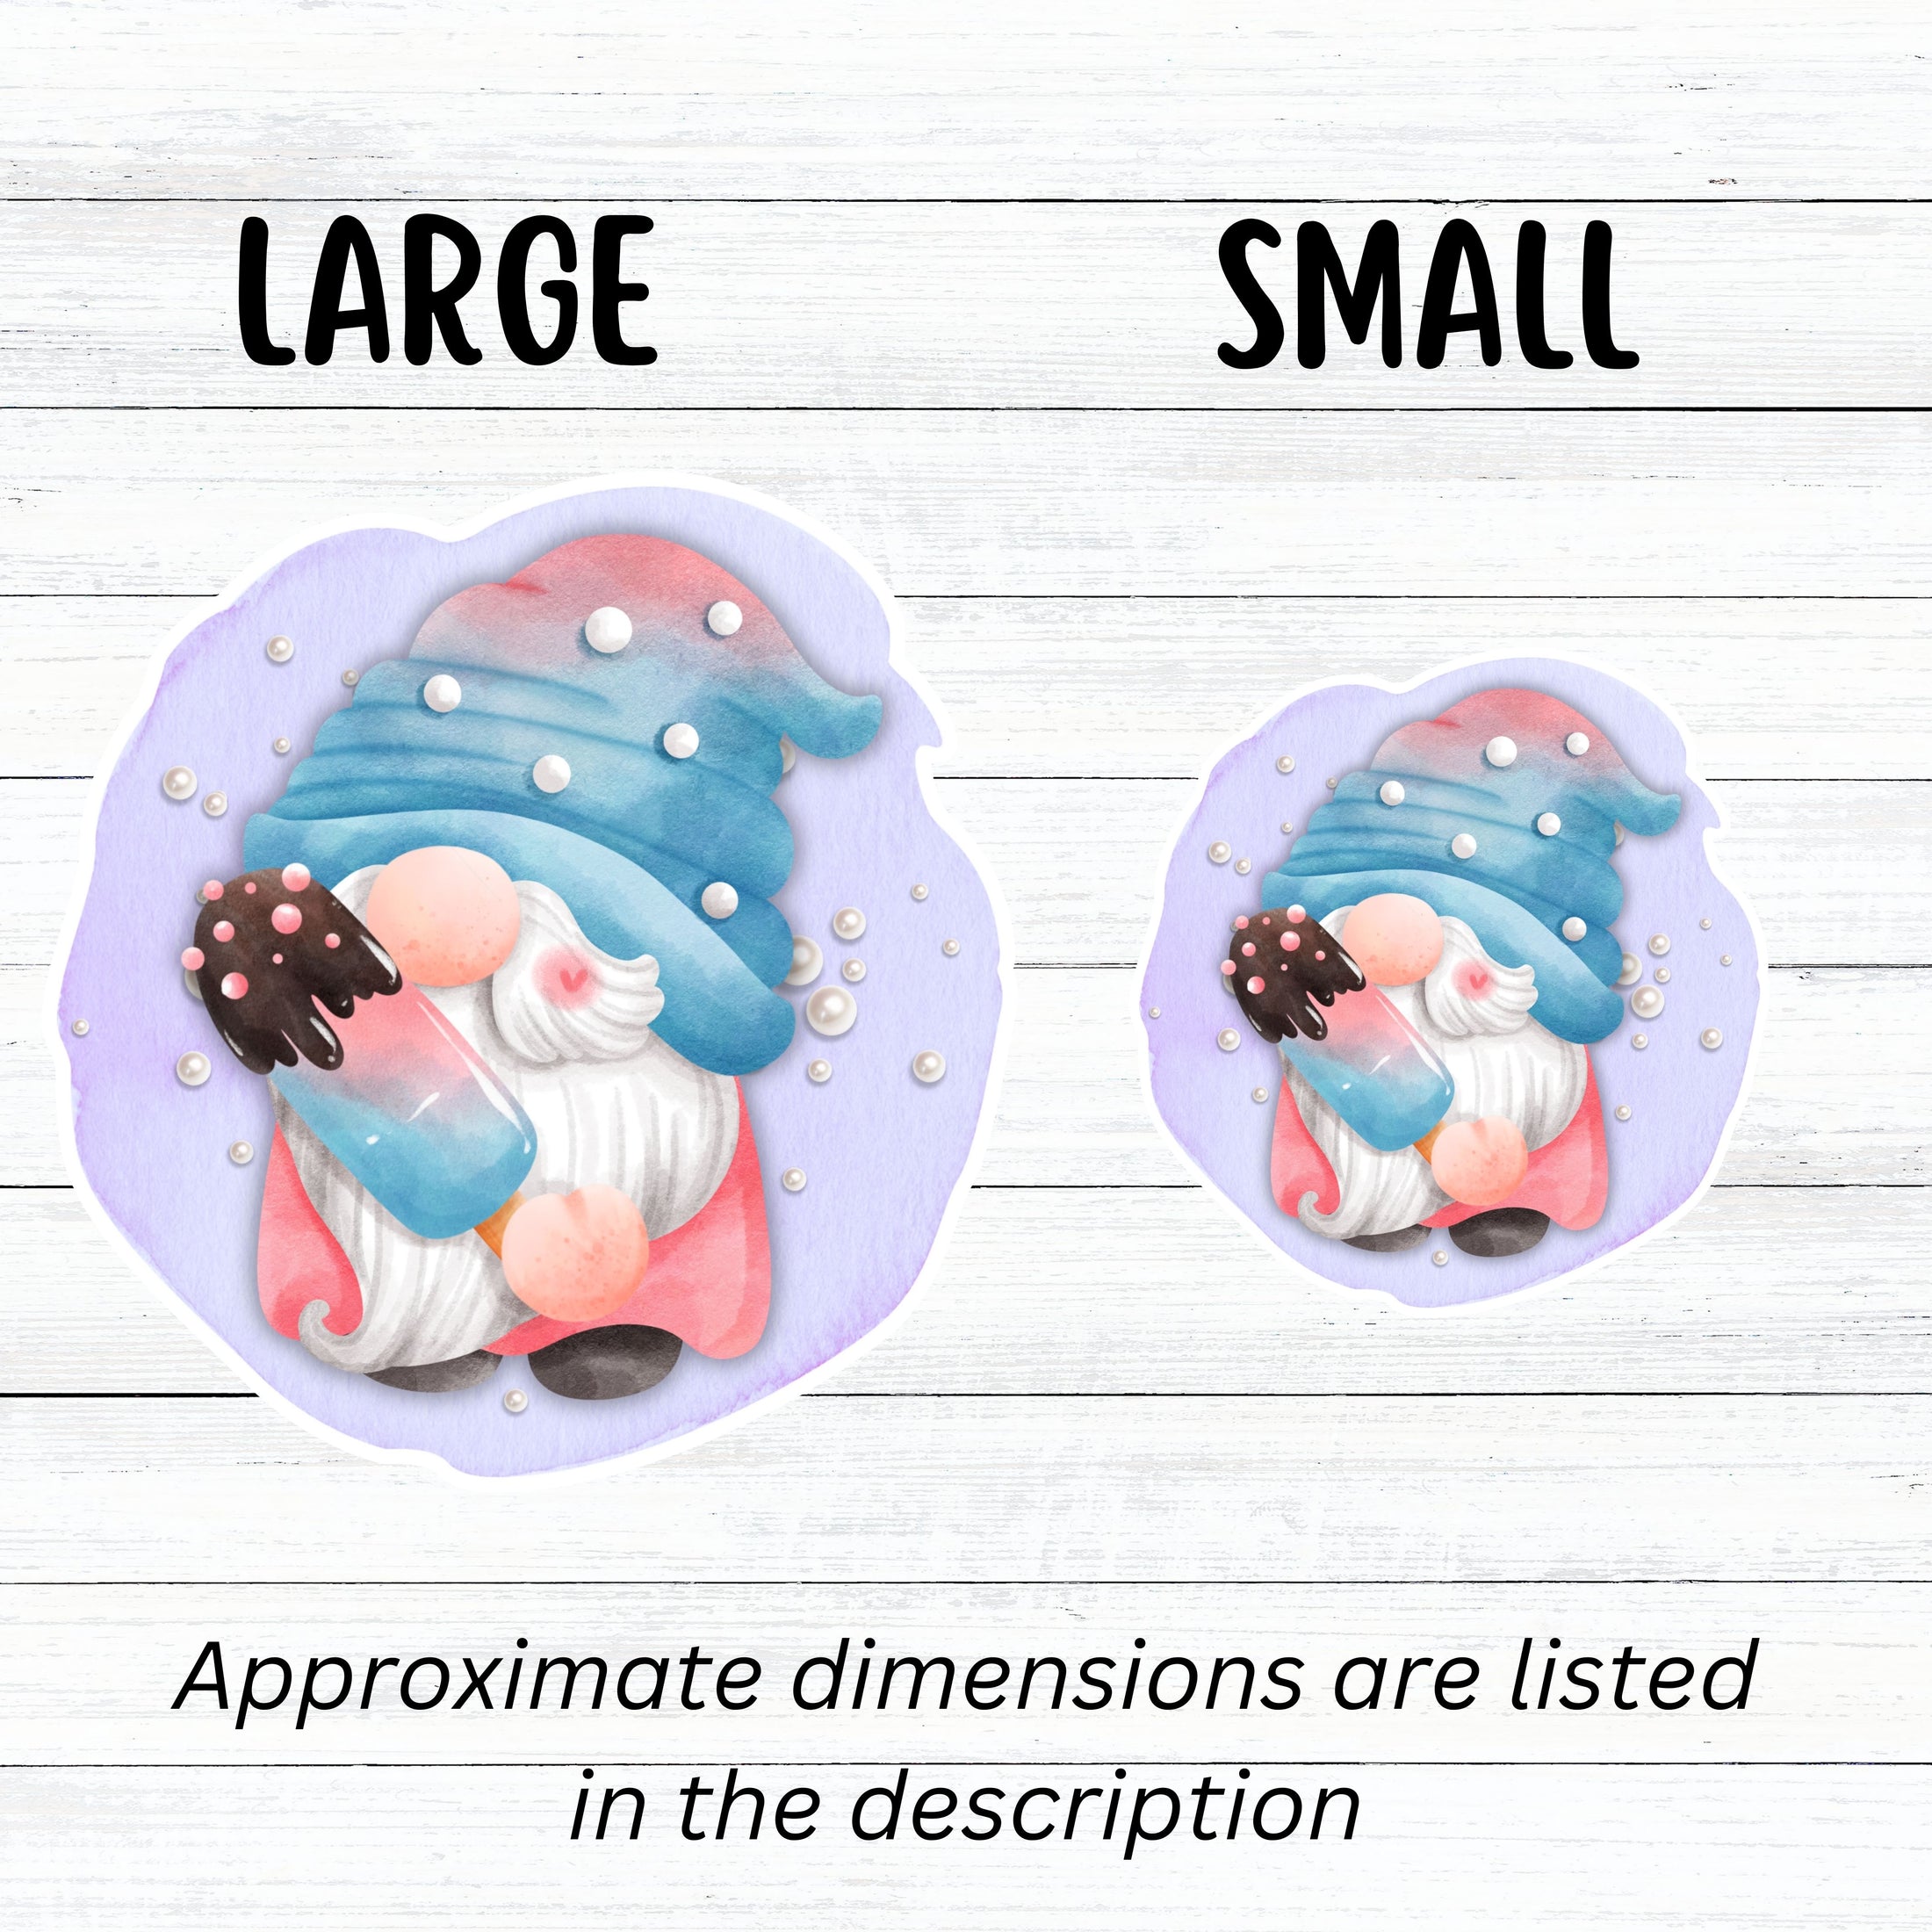 This image shows large and small gnome with a popsicle stickers next to each other.